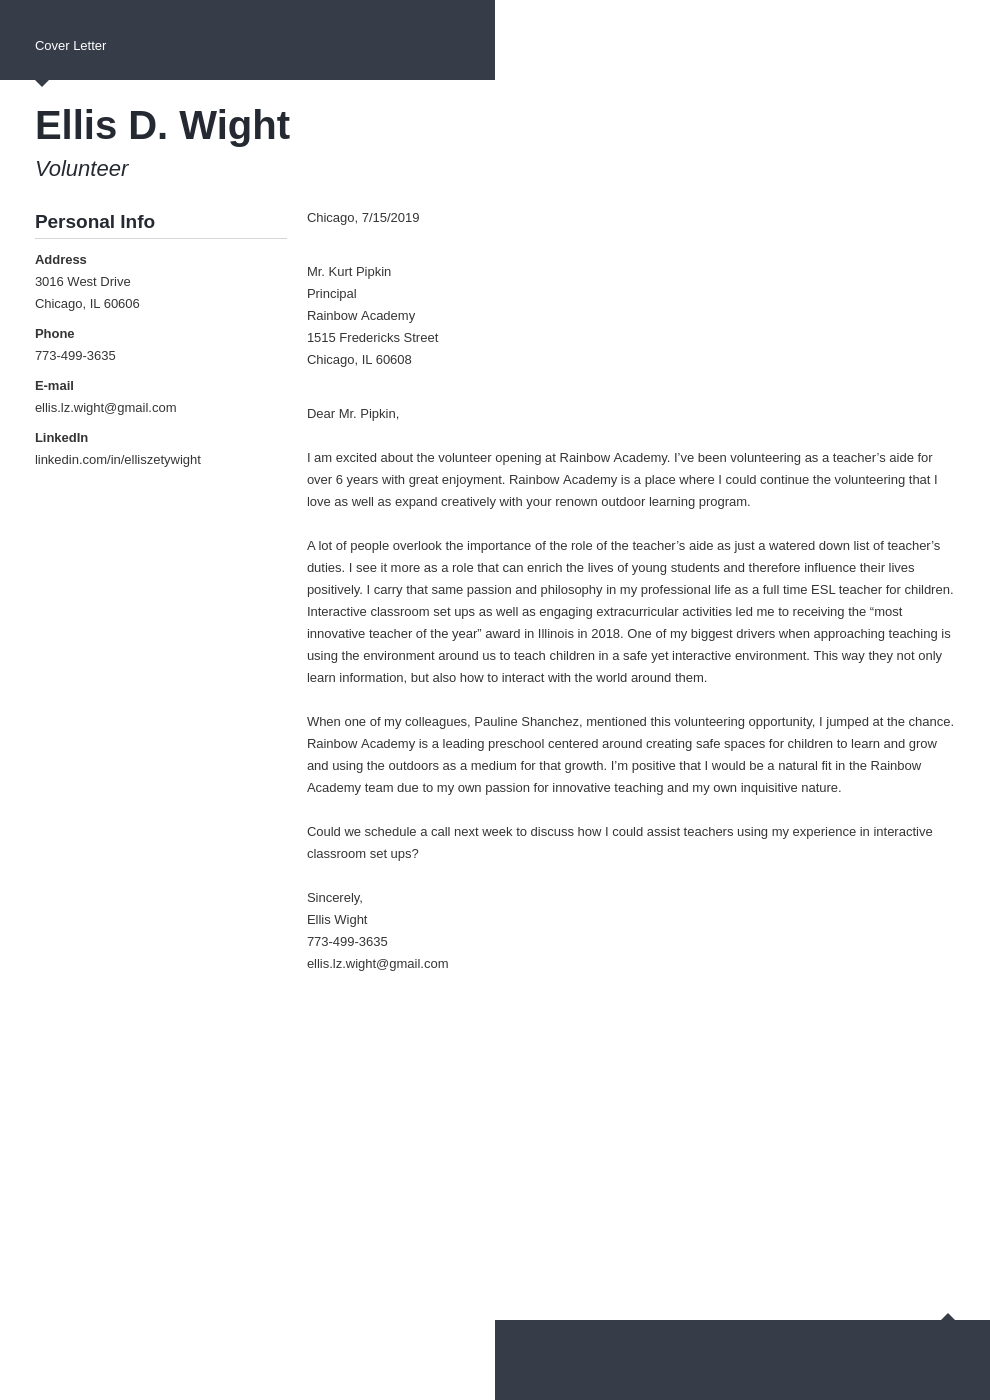 Volunteer Cover Letter Example & Writing Guide